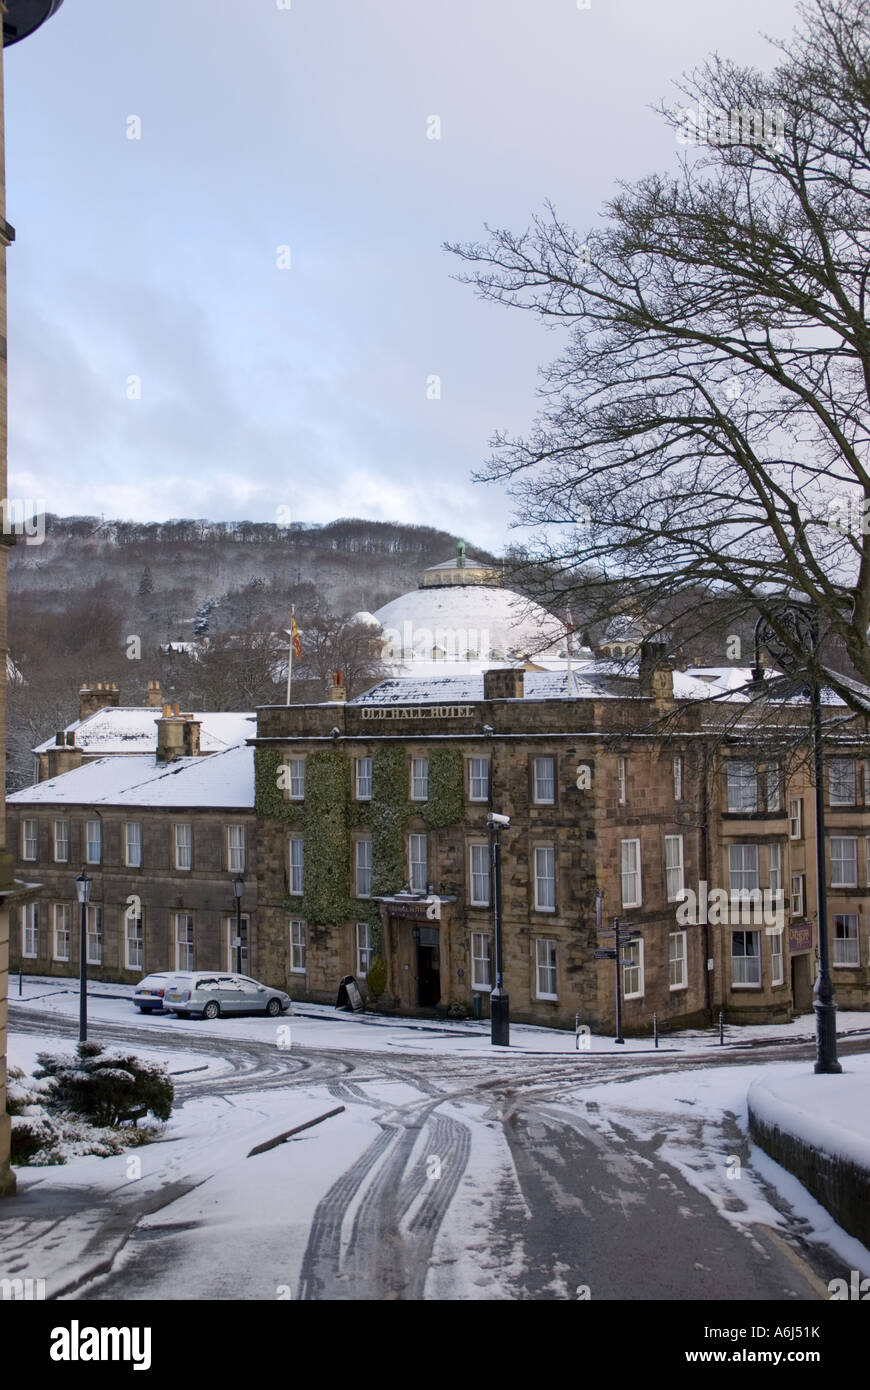 The Old Hall Hotel and Dome in Buxton Stock Photo